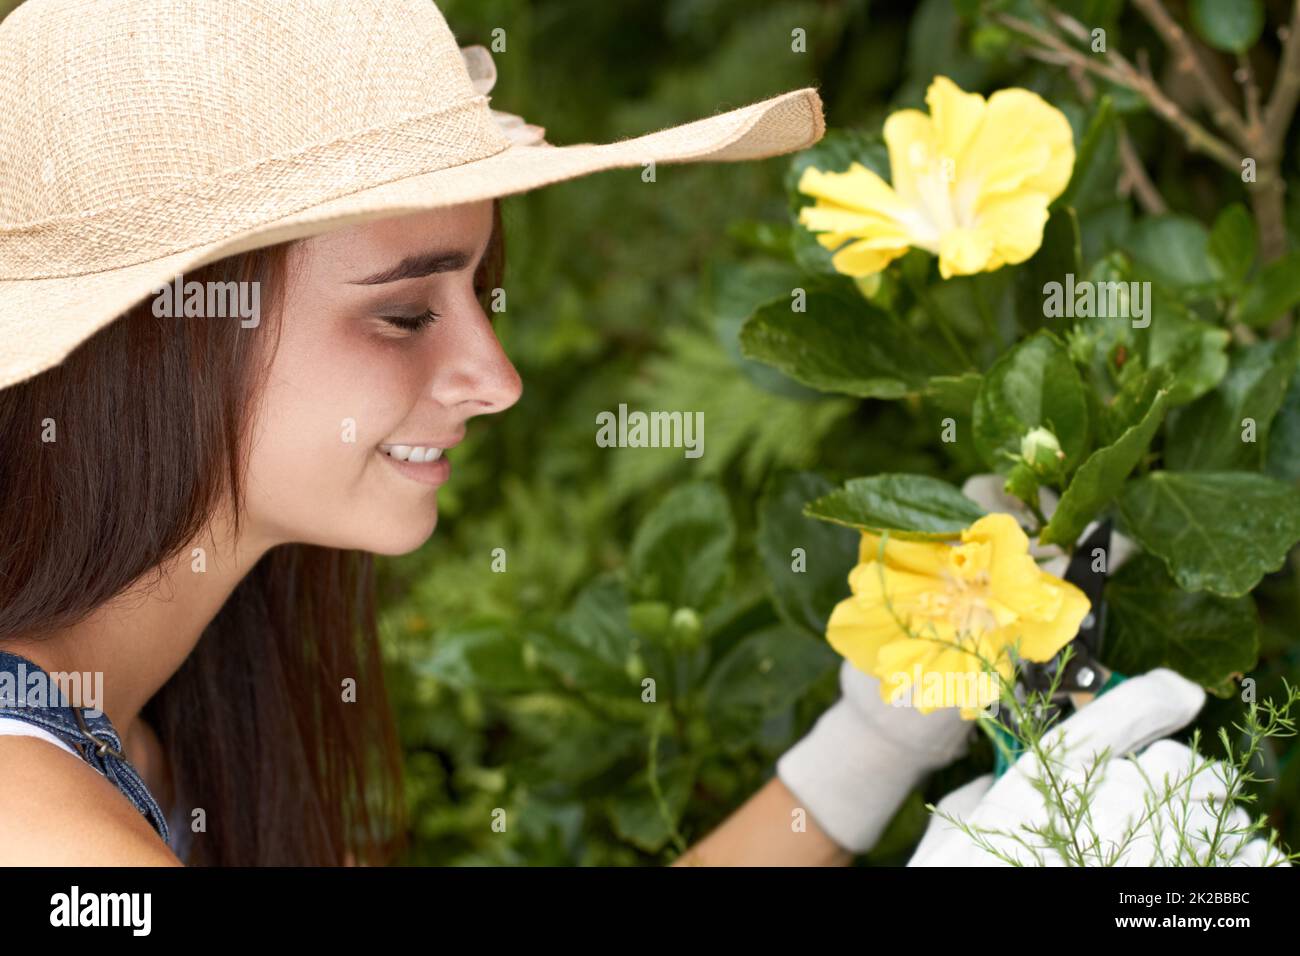 Shes worked hard for those perfect flowers. A beautiful young woman tending to the flowers in her garden. Stock Photo